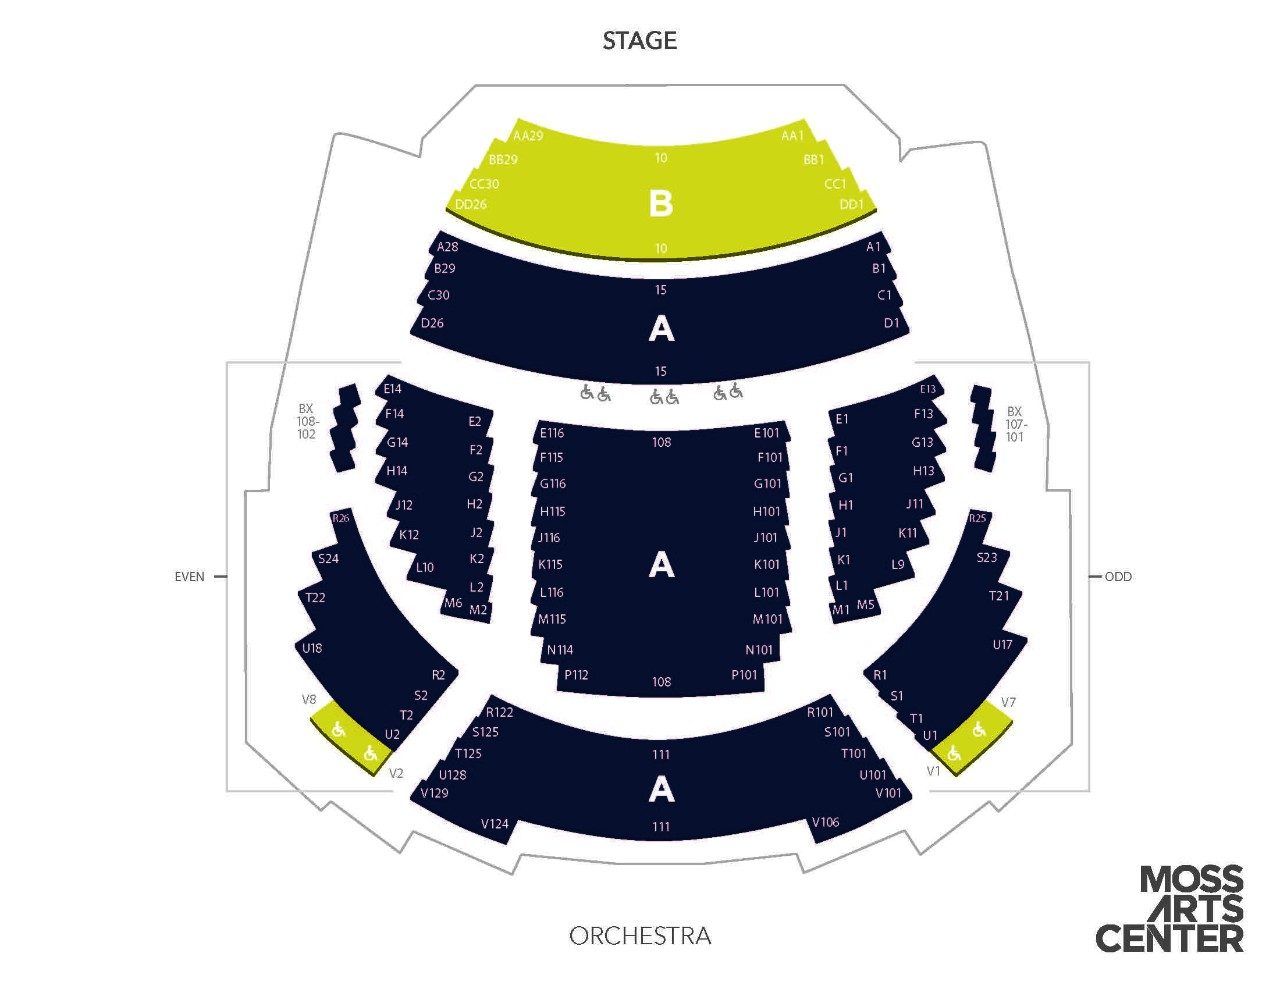 Roanoke Performing Arts Theatre Seating Chart